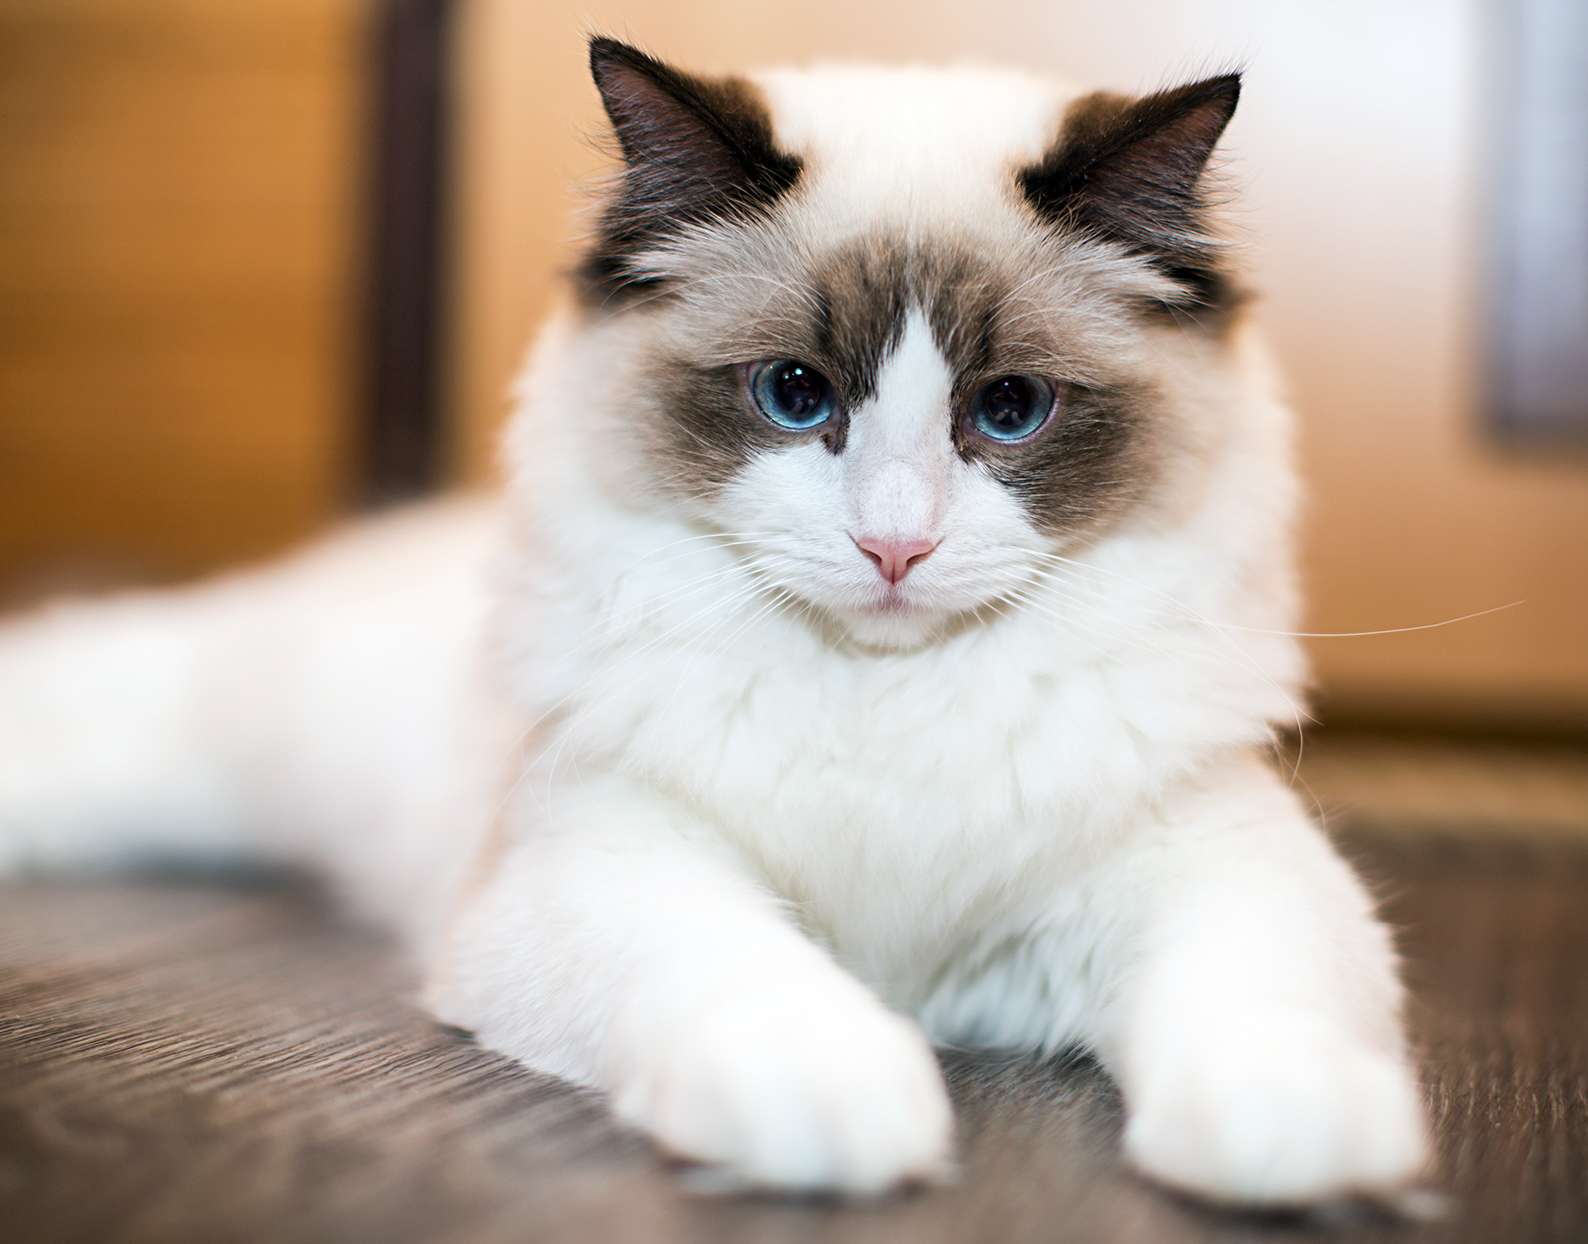 Where Are Ragdoll Cats From